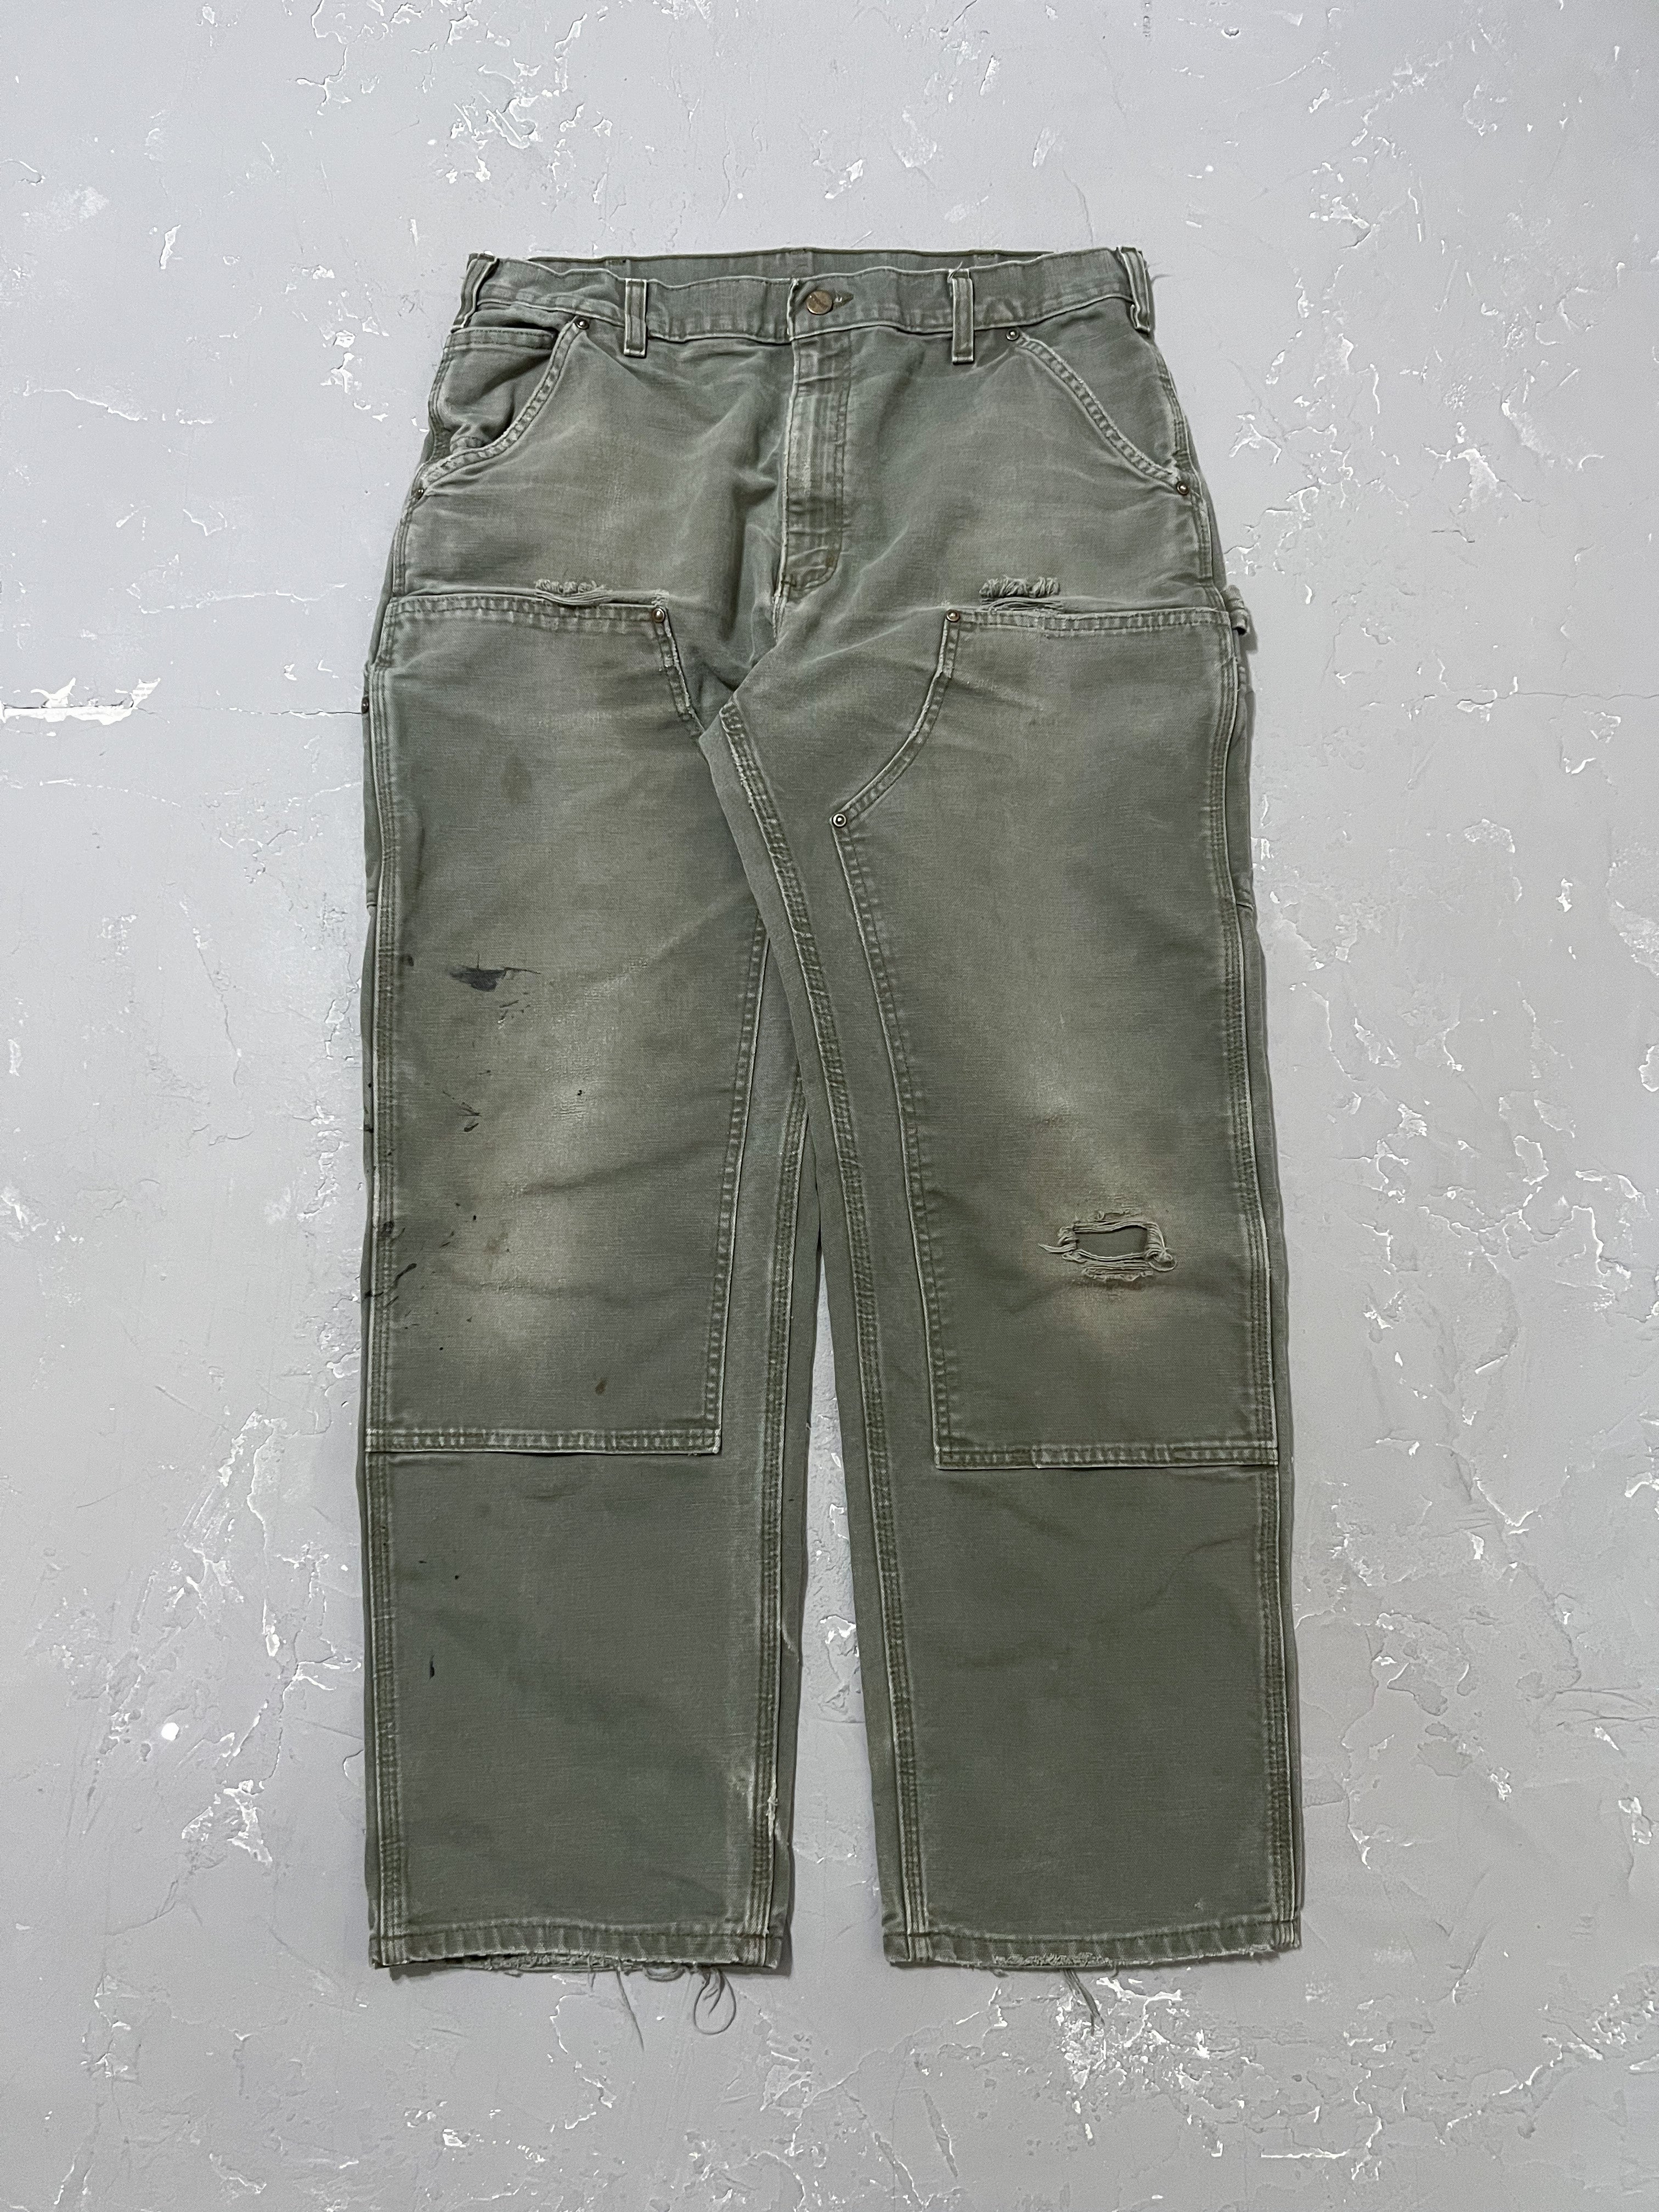 Carhartt Moss Green Double Knee Pants [36 x 32] – From The Past